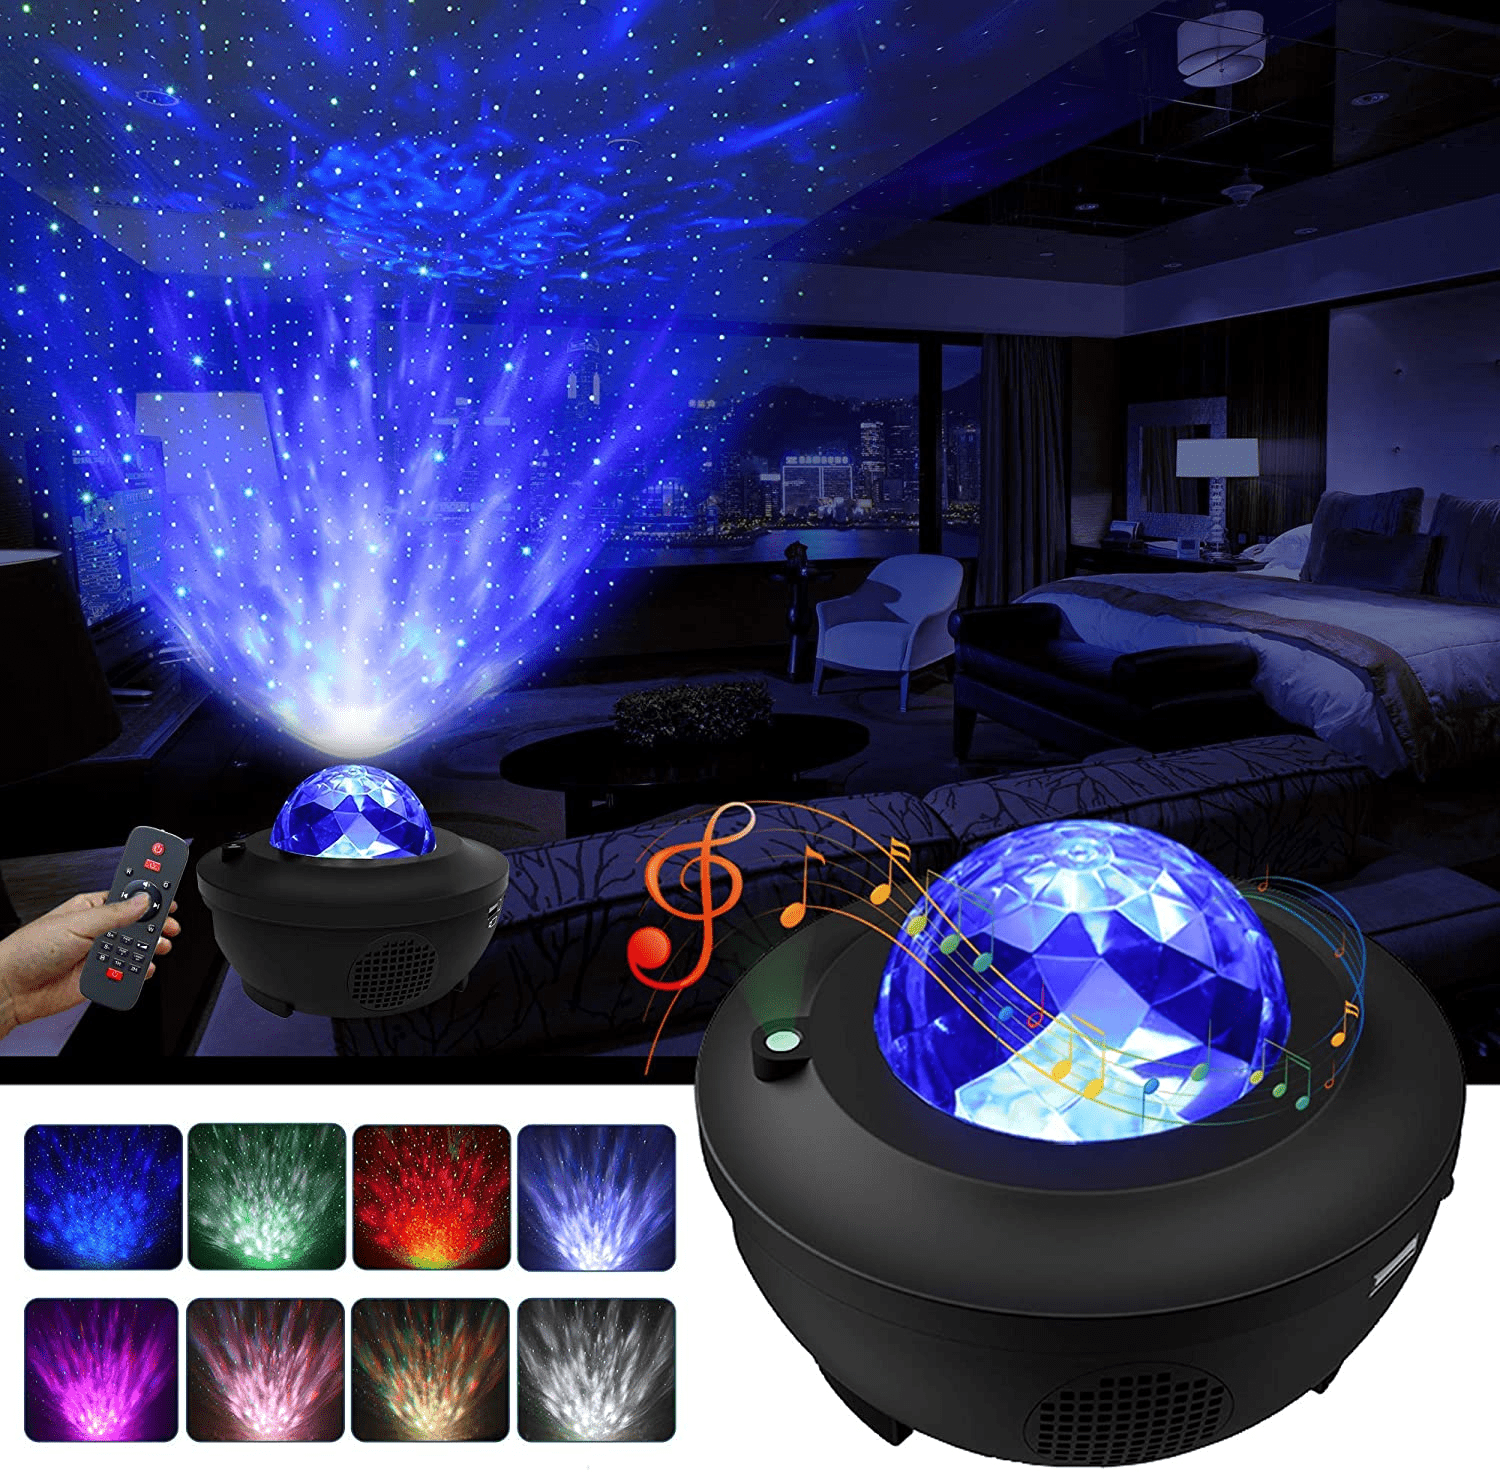 Night Light Projector 3 in 1 Galaxy Projector Star Projector w/LED